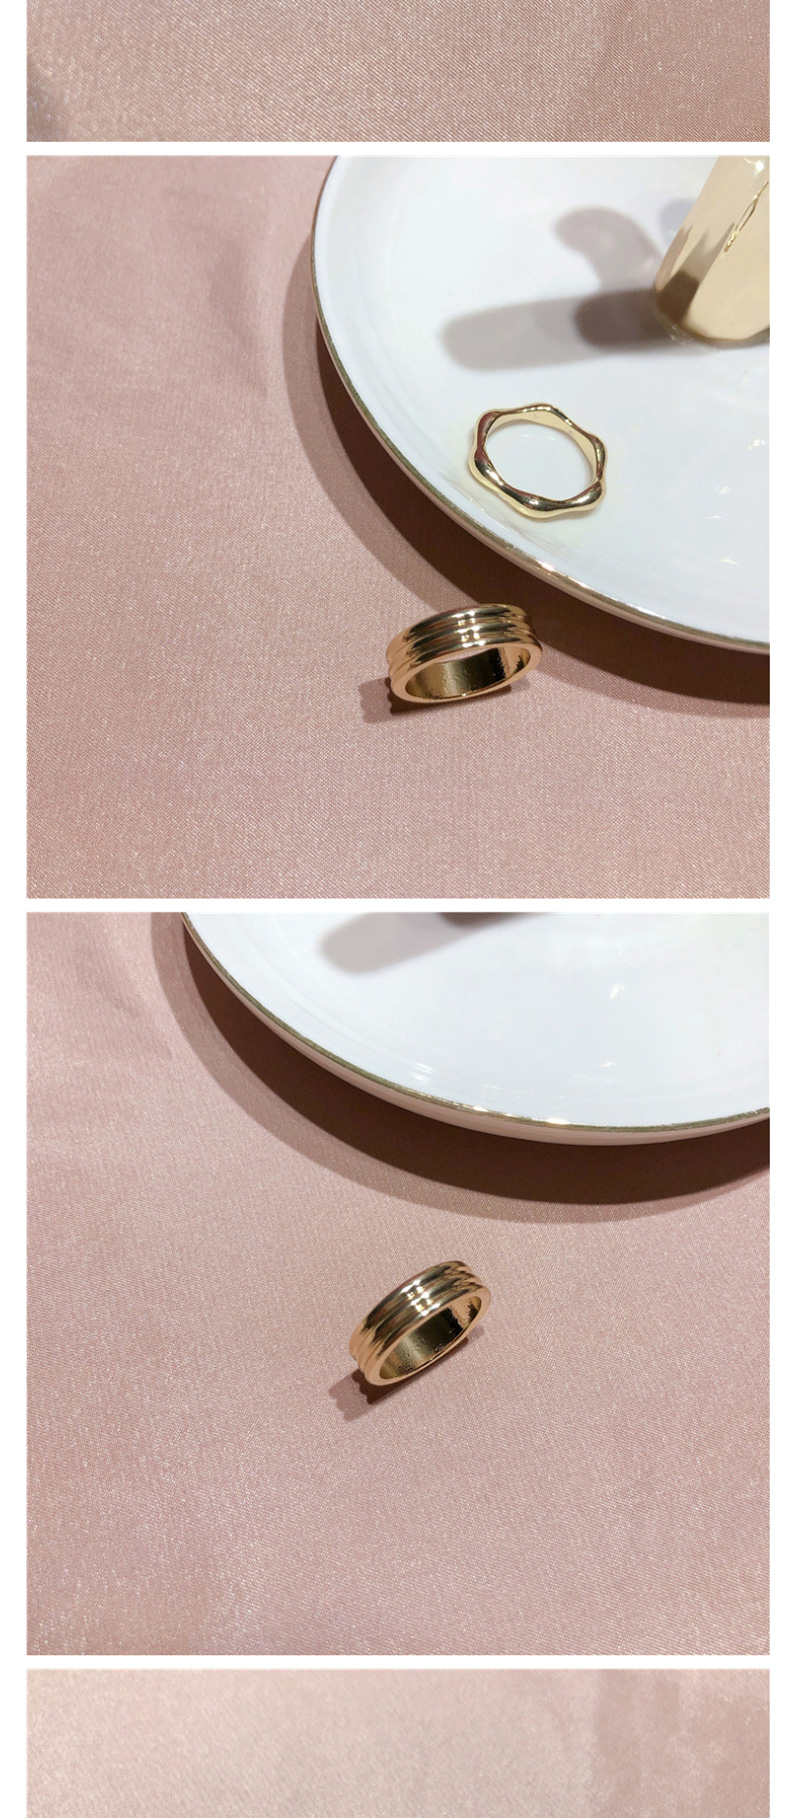 Fashion Three-layer Ring (gold) Curved Wide-faced Light Ring With Water Drops,Fashion Rings